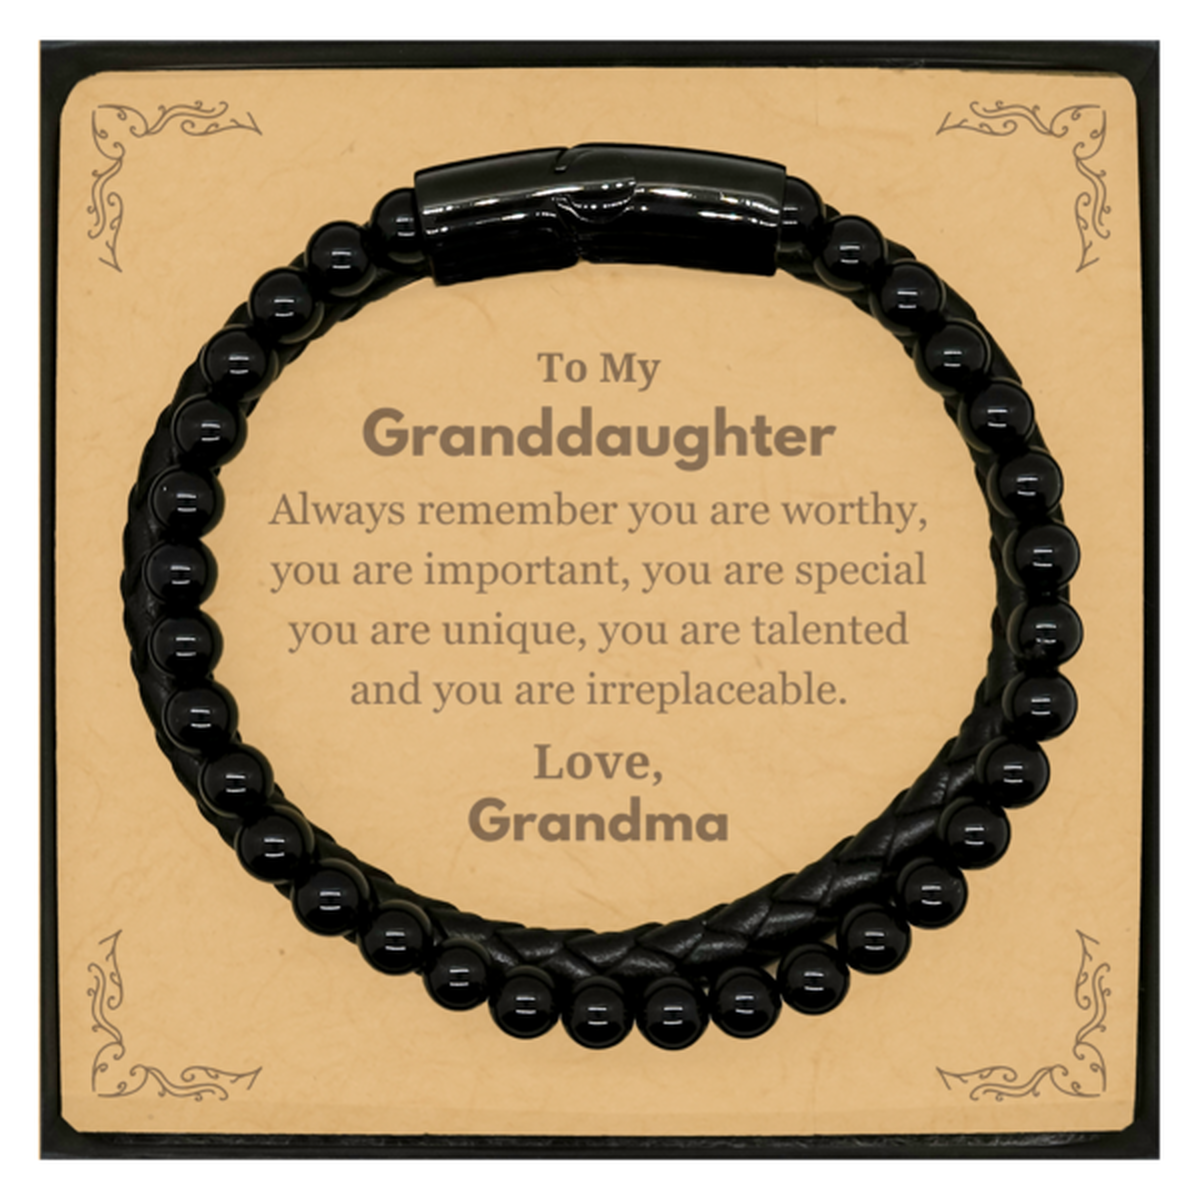 Granddaughter Birthday Gifts from Grandma, Inspirational Stone Leather Bracelets for Granddaughter Christmas Graduation Gifts for Granddaughter Always remember you are worthy, you are important. Love, Grandma